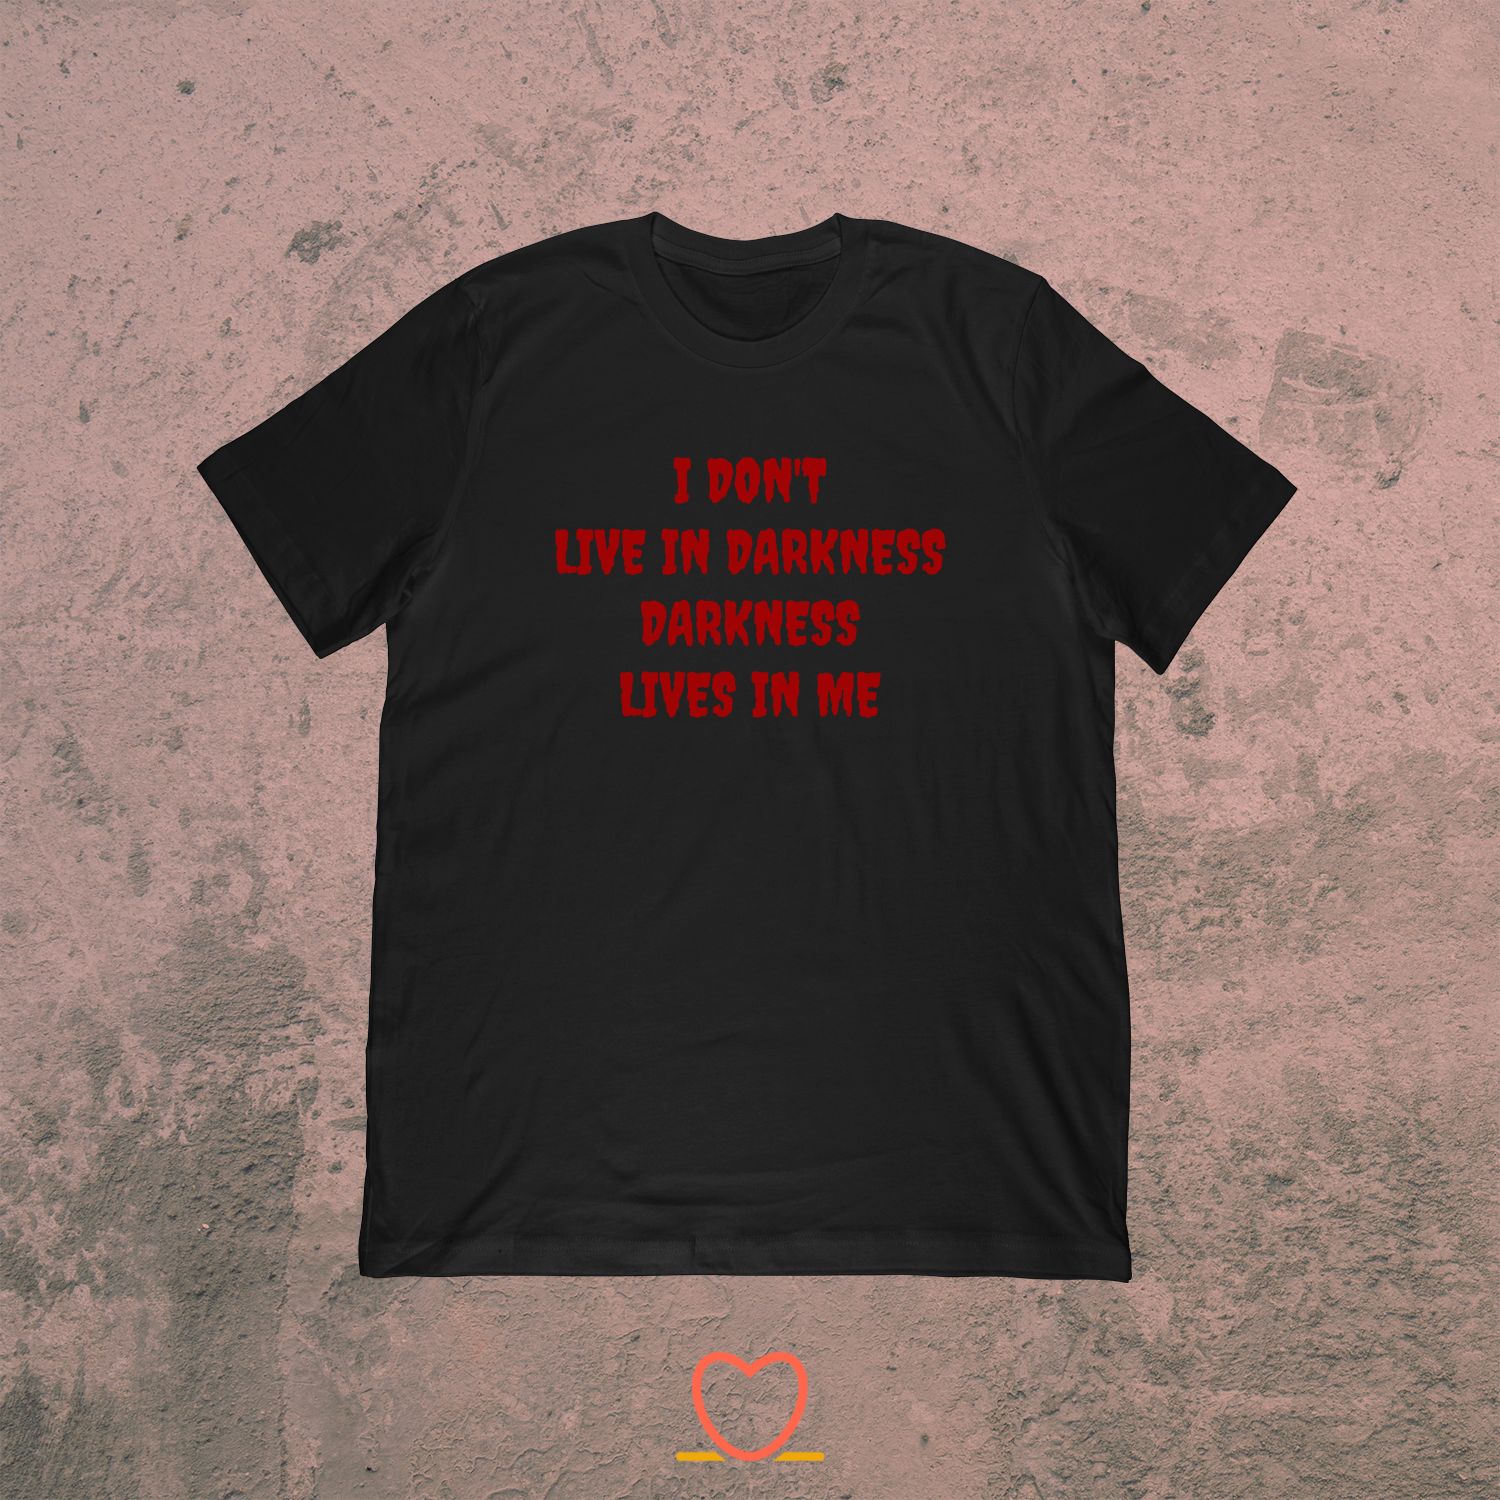 Darkness Lives In Me – Horror Themed Tee